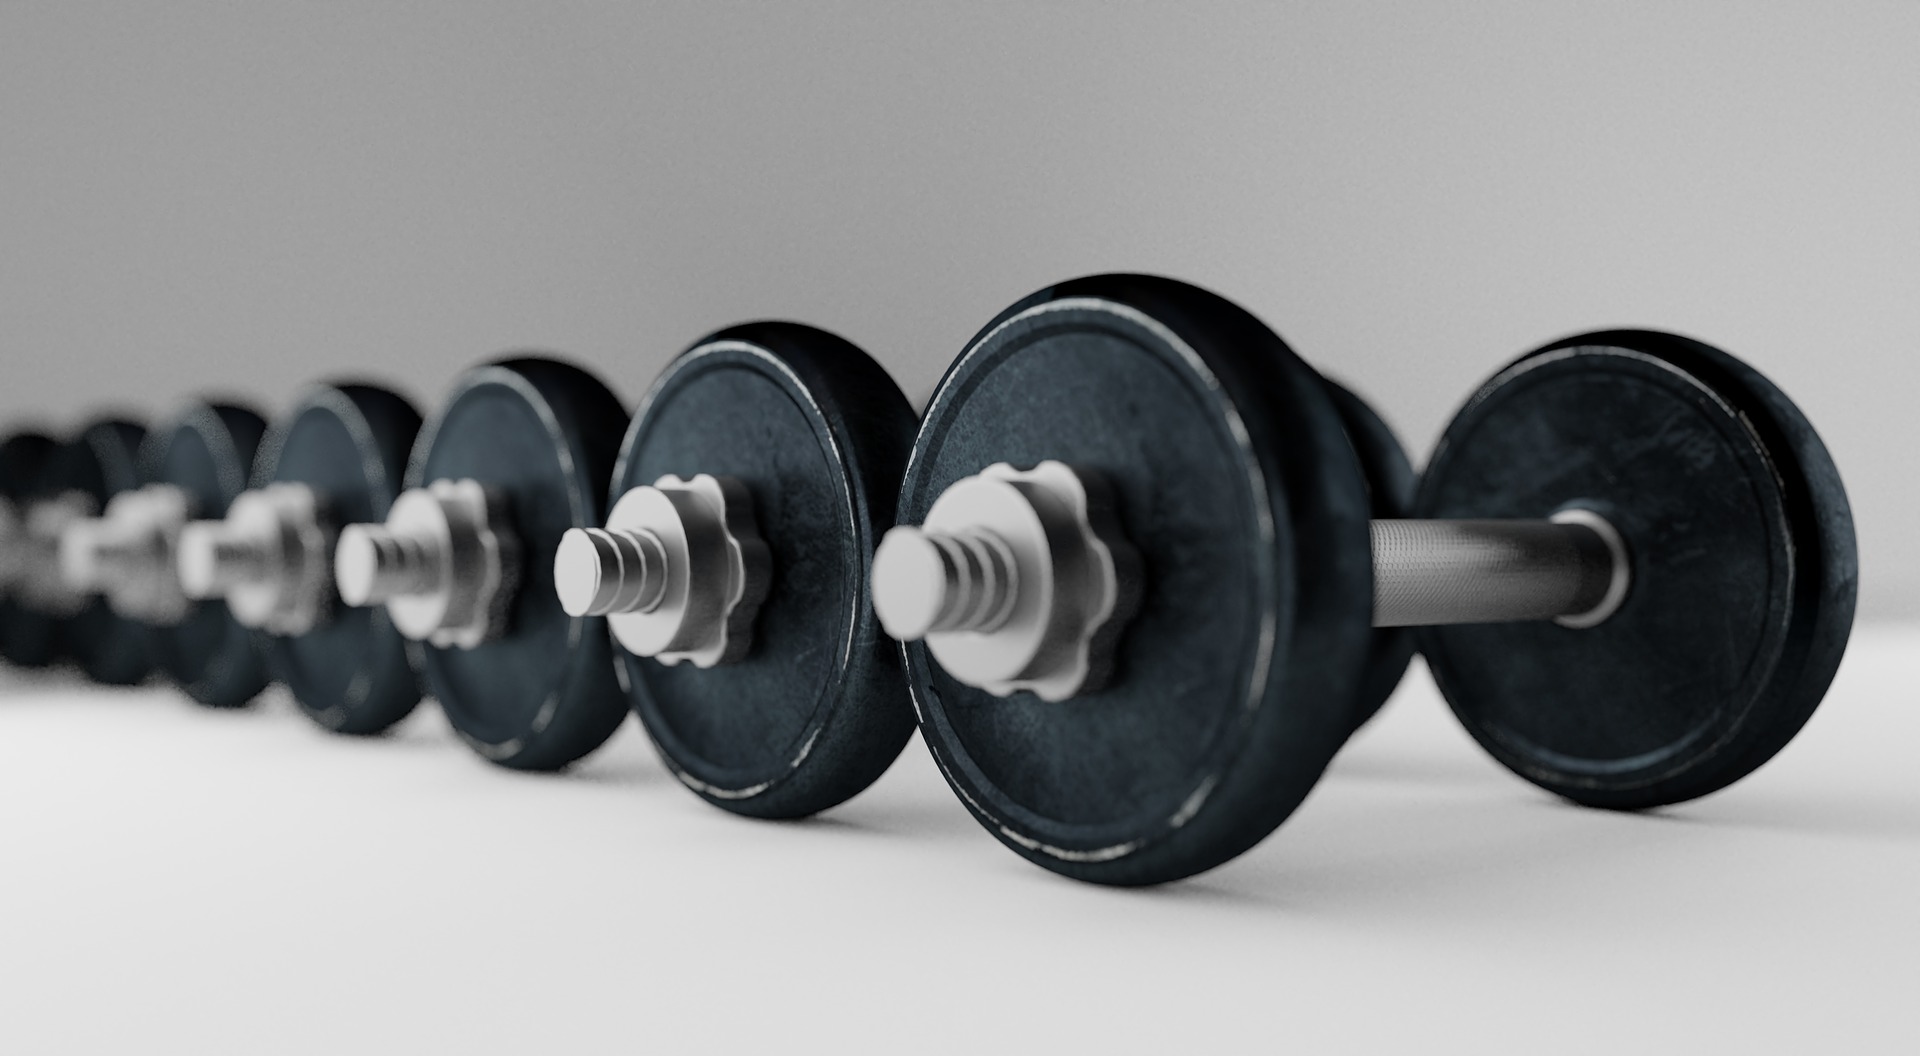 dumbbell weights in a roll